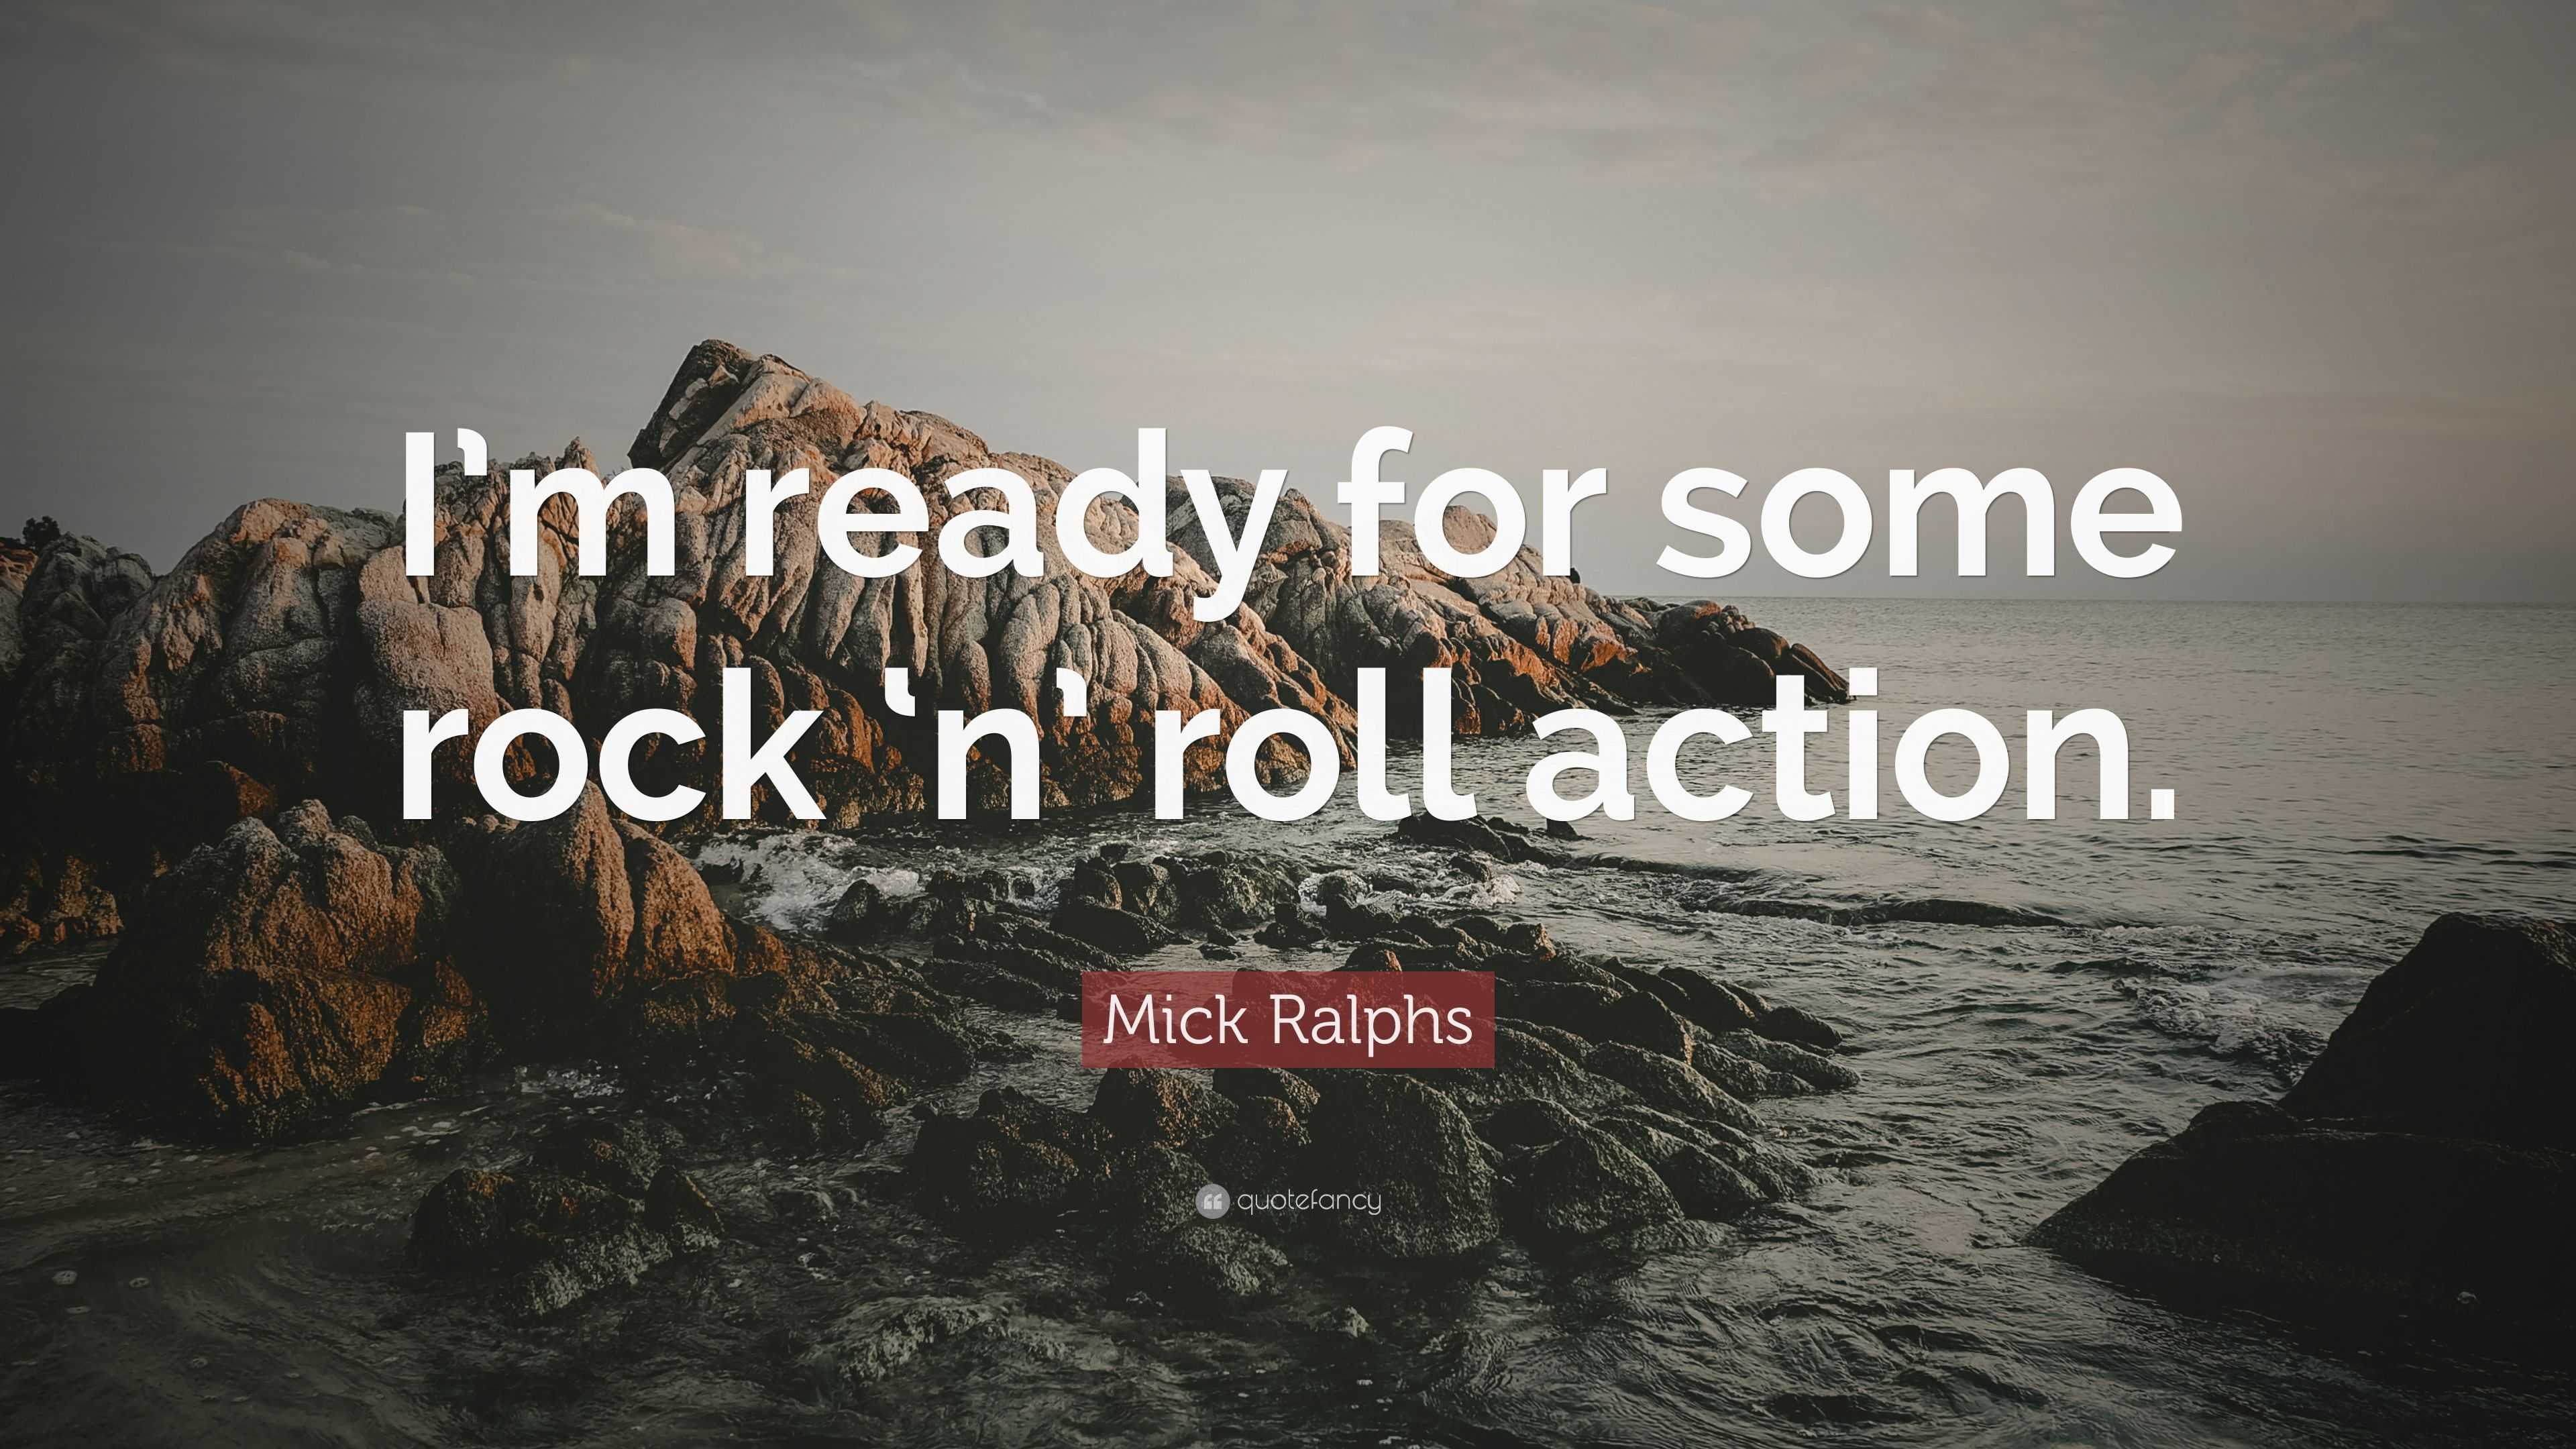 Mick Ralphs Quote: “I'm ready for some rock 'n' roll action.”